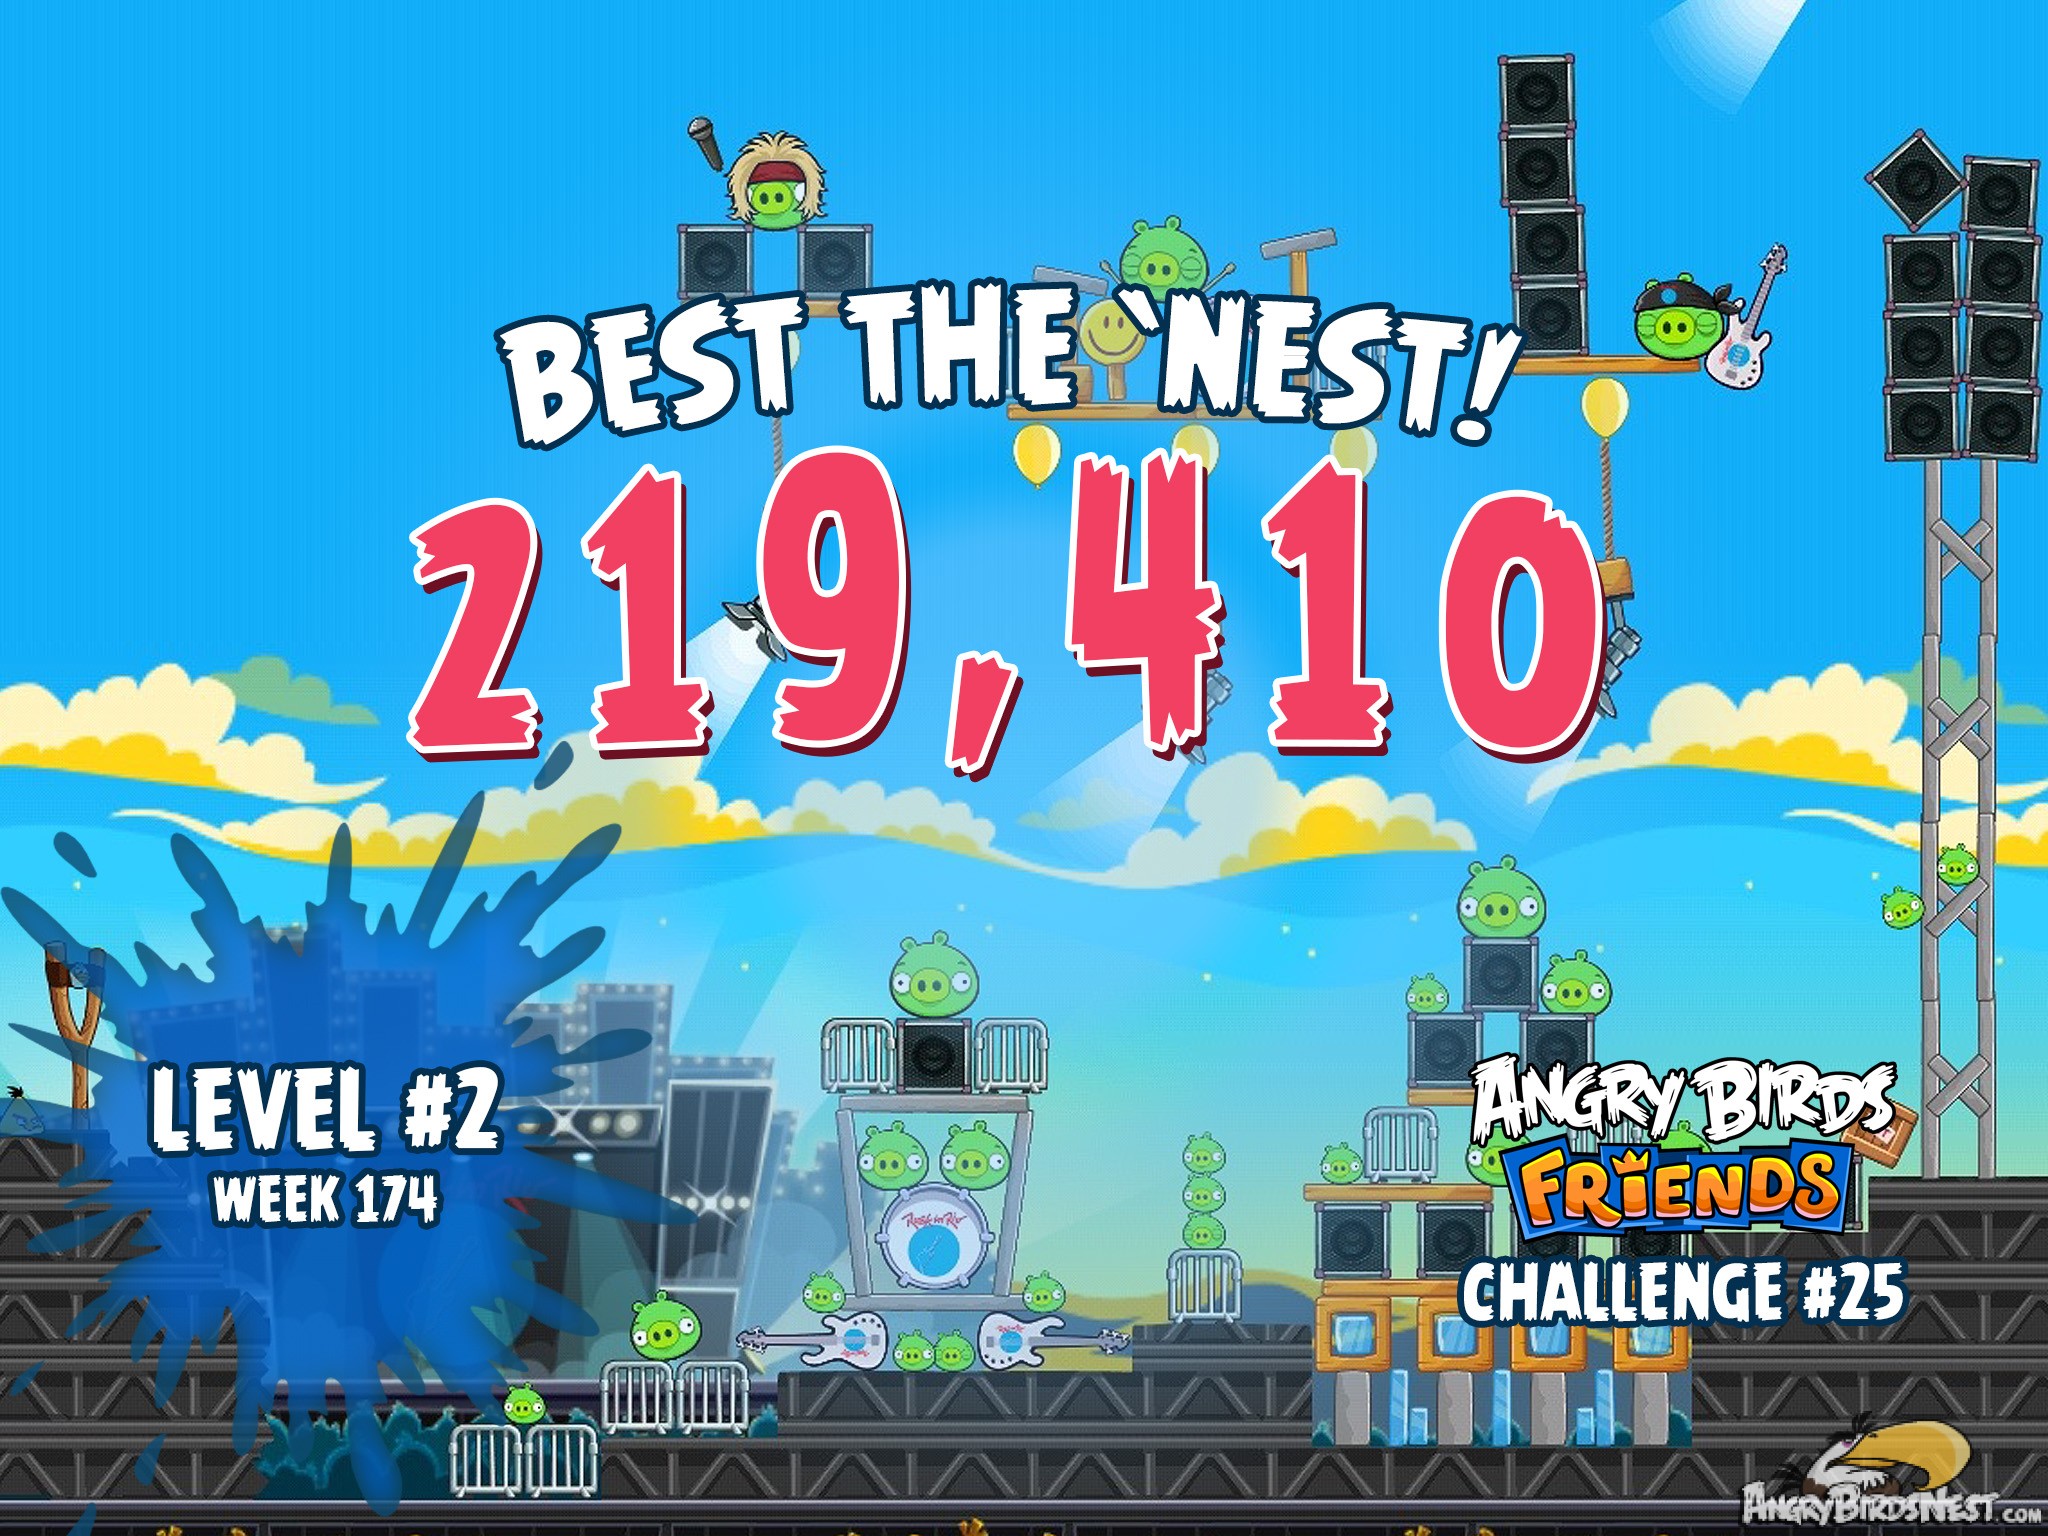 Angry Birds Friends Best the Nest Challenge Week 25